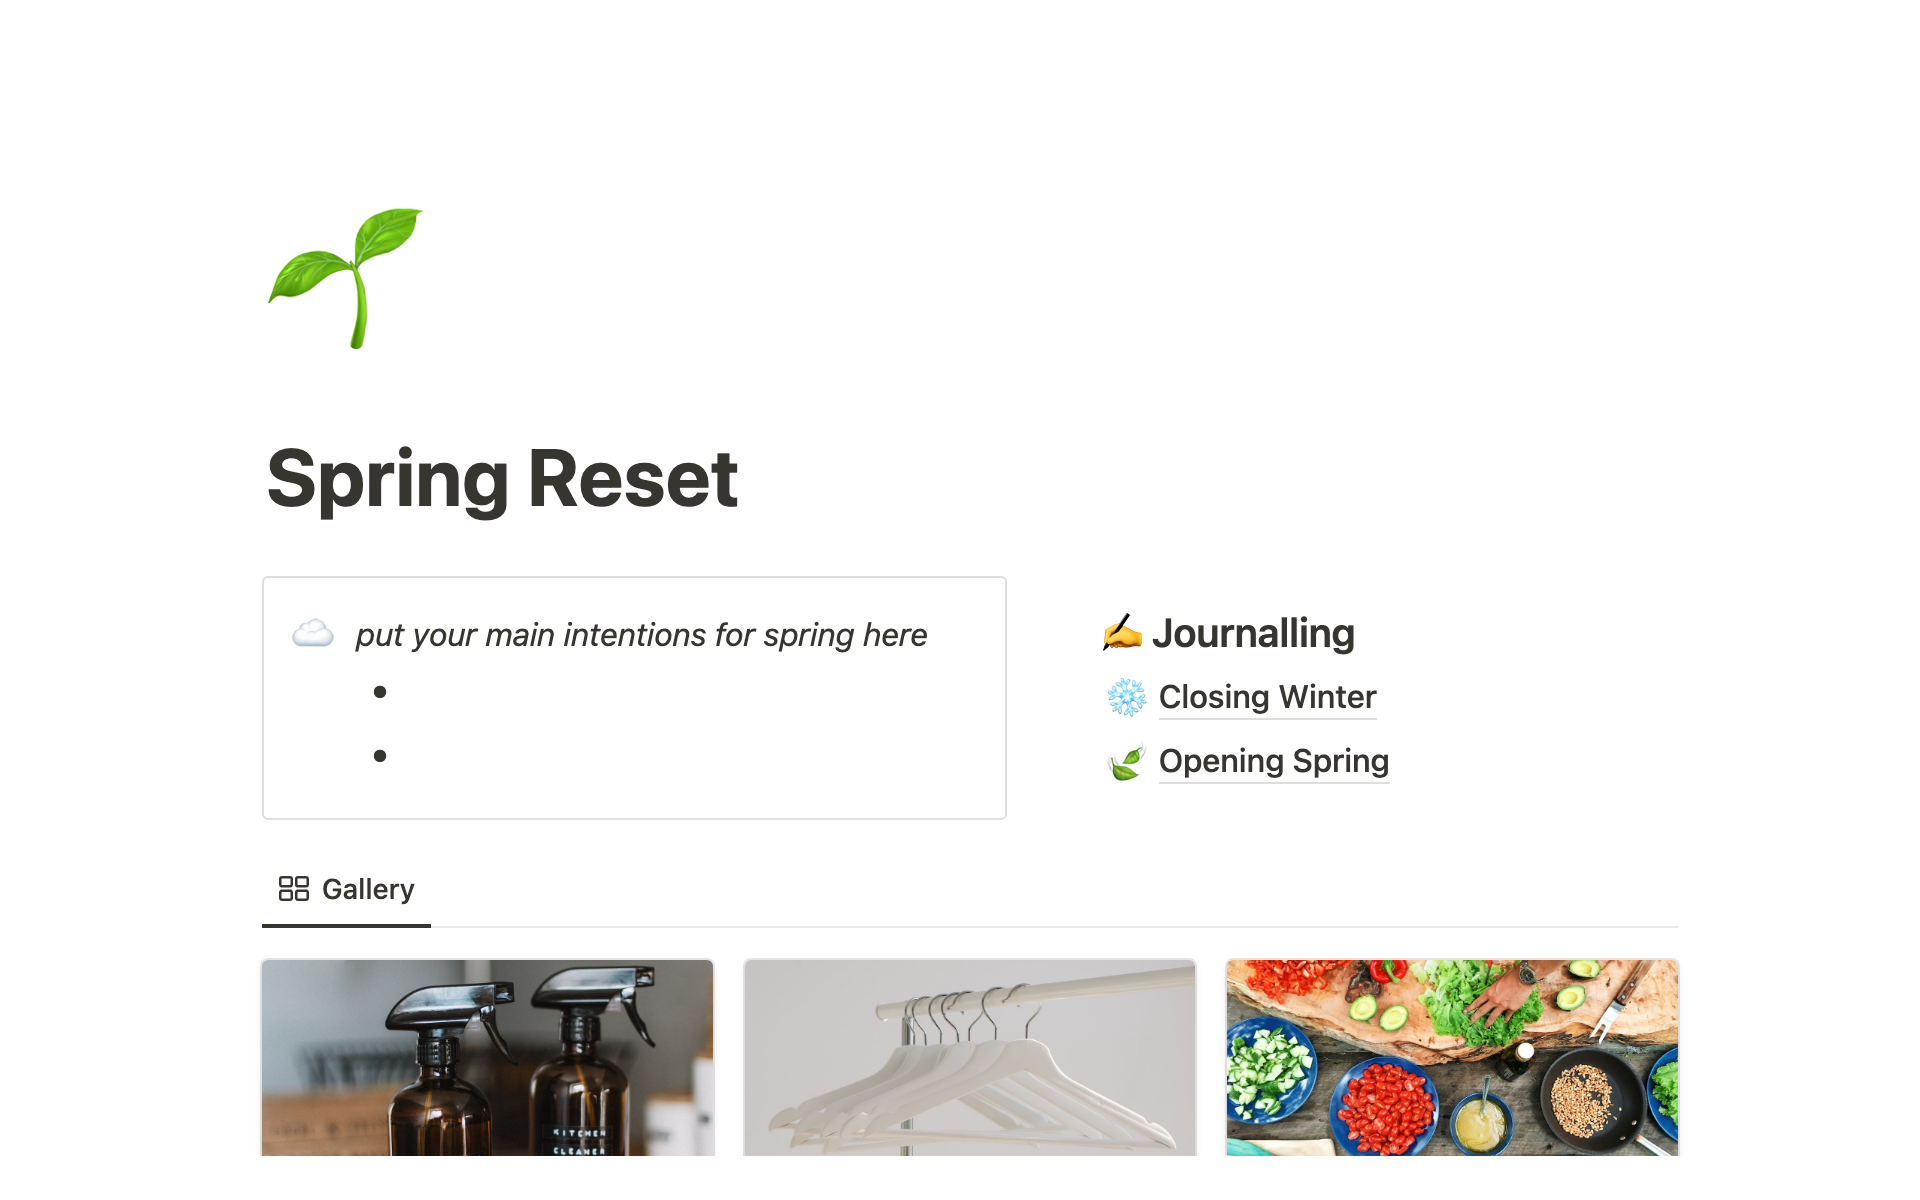 Provides a guide for users to reset for Spring, including a Spring cleaning checklist, decluttering checklist, habit tracker, space for Spring recipes and journalling to reflect on Winter and open Spring.